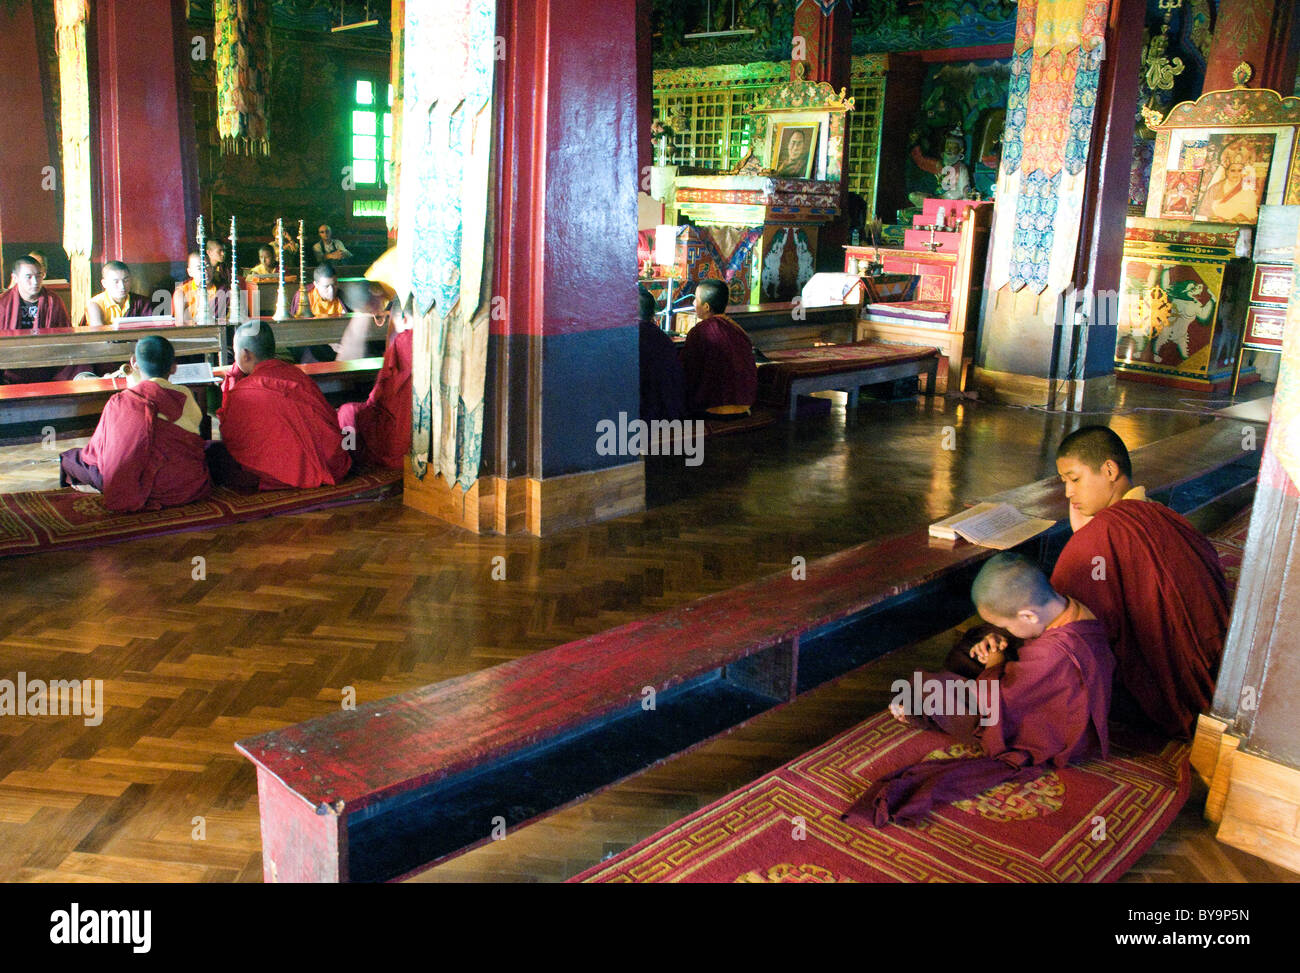 Buddhist monks and novices participate in a prayer service in the Fo-Brang monastery in Kalimpong, West Bengal, India Stock Photo